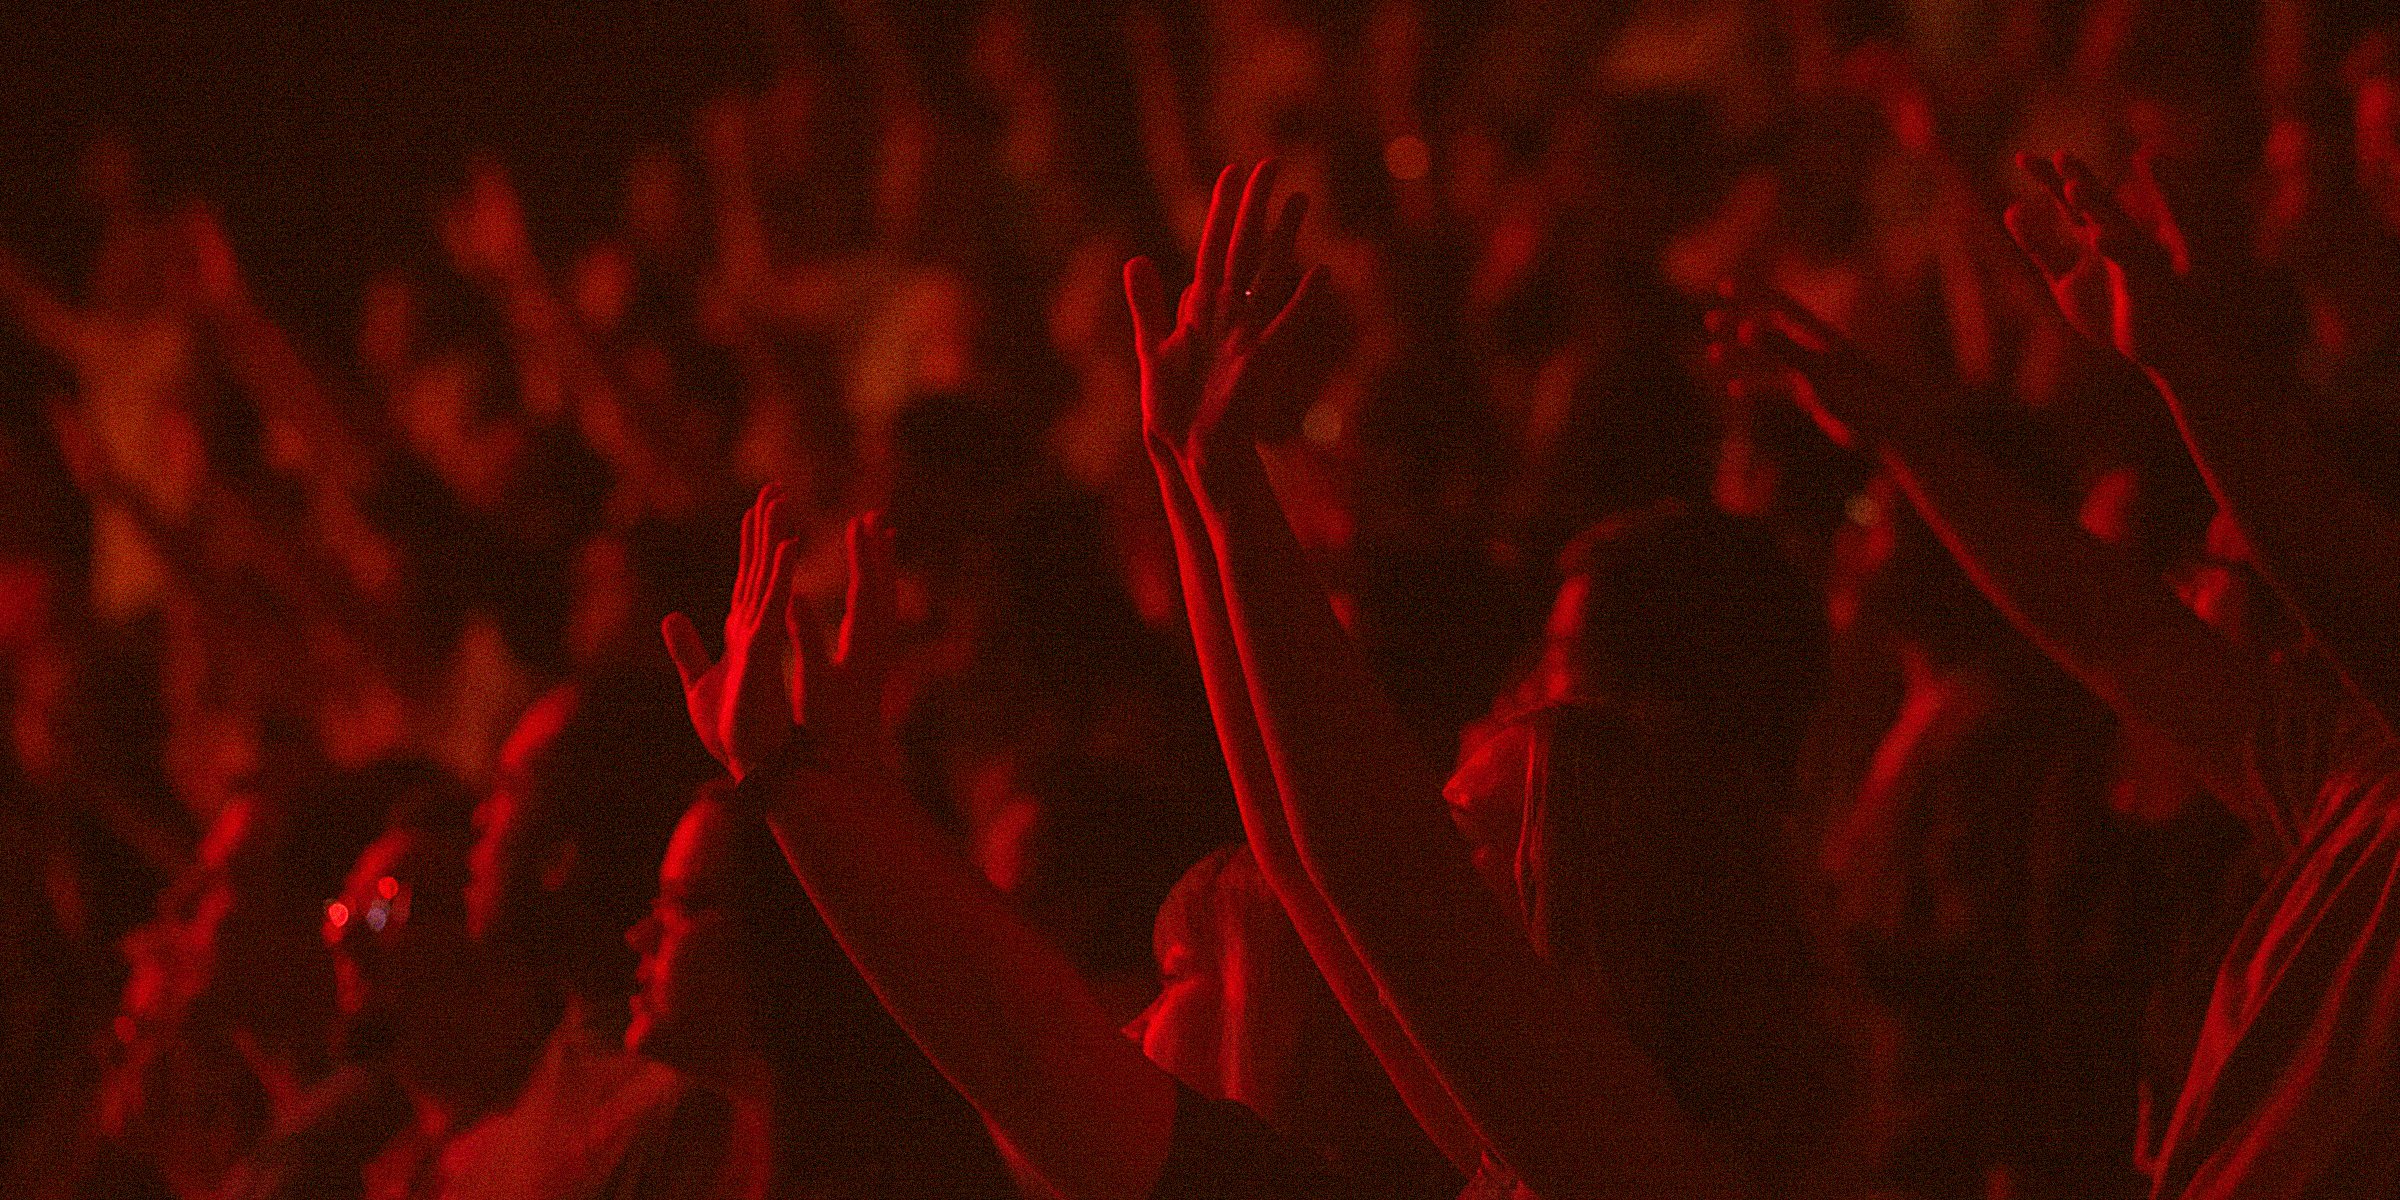 A crowd throwing their hands up | Source: Unsplash